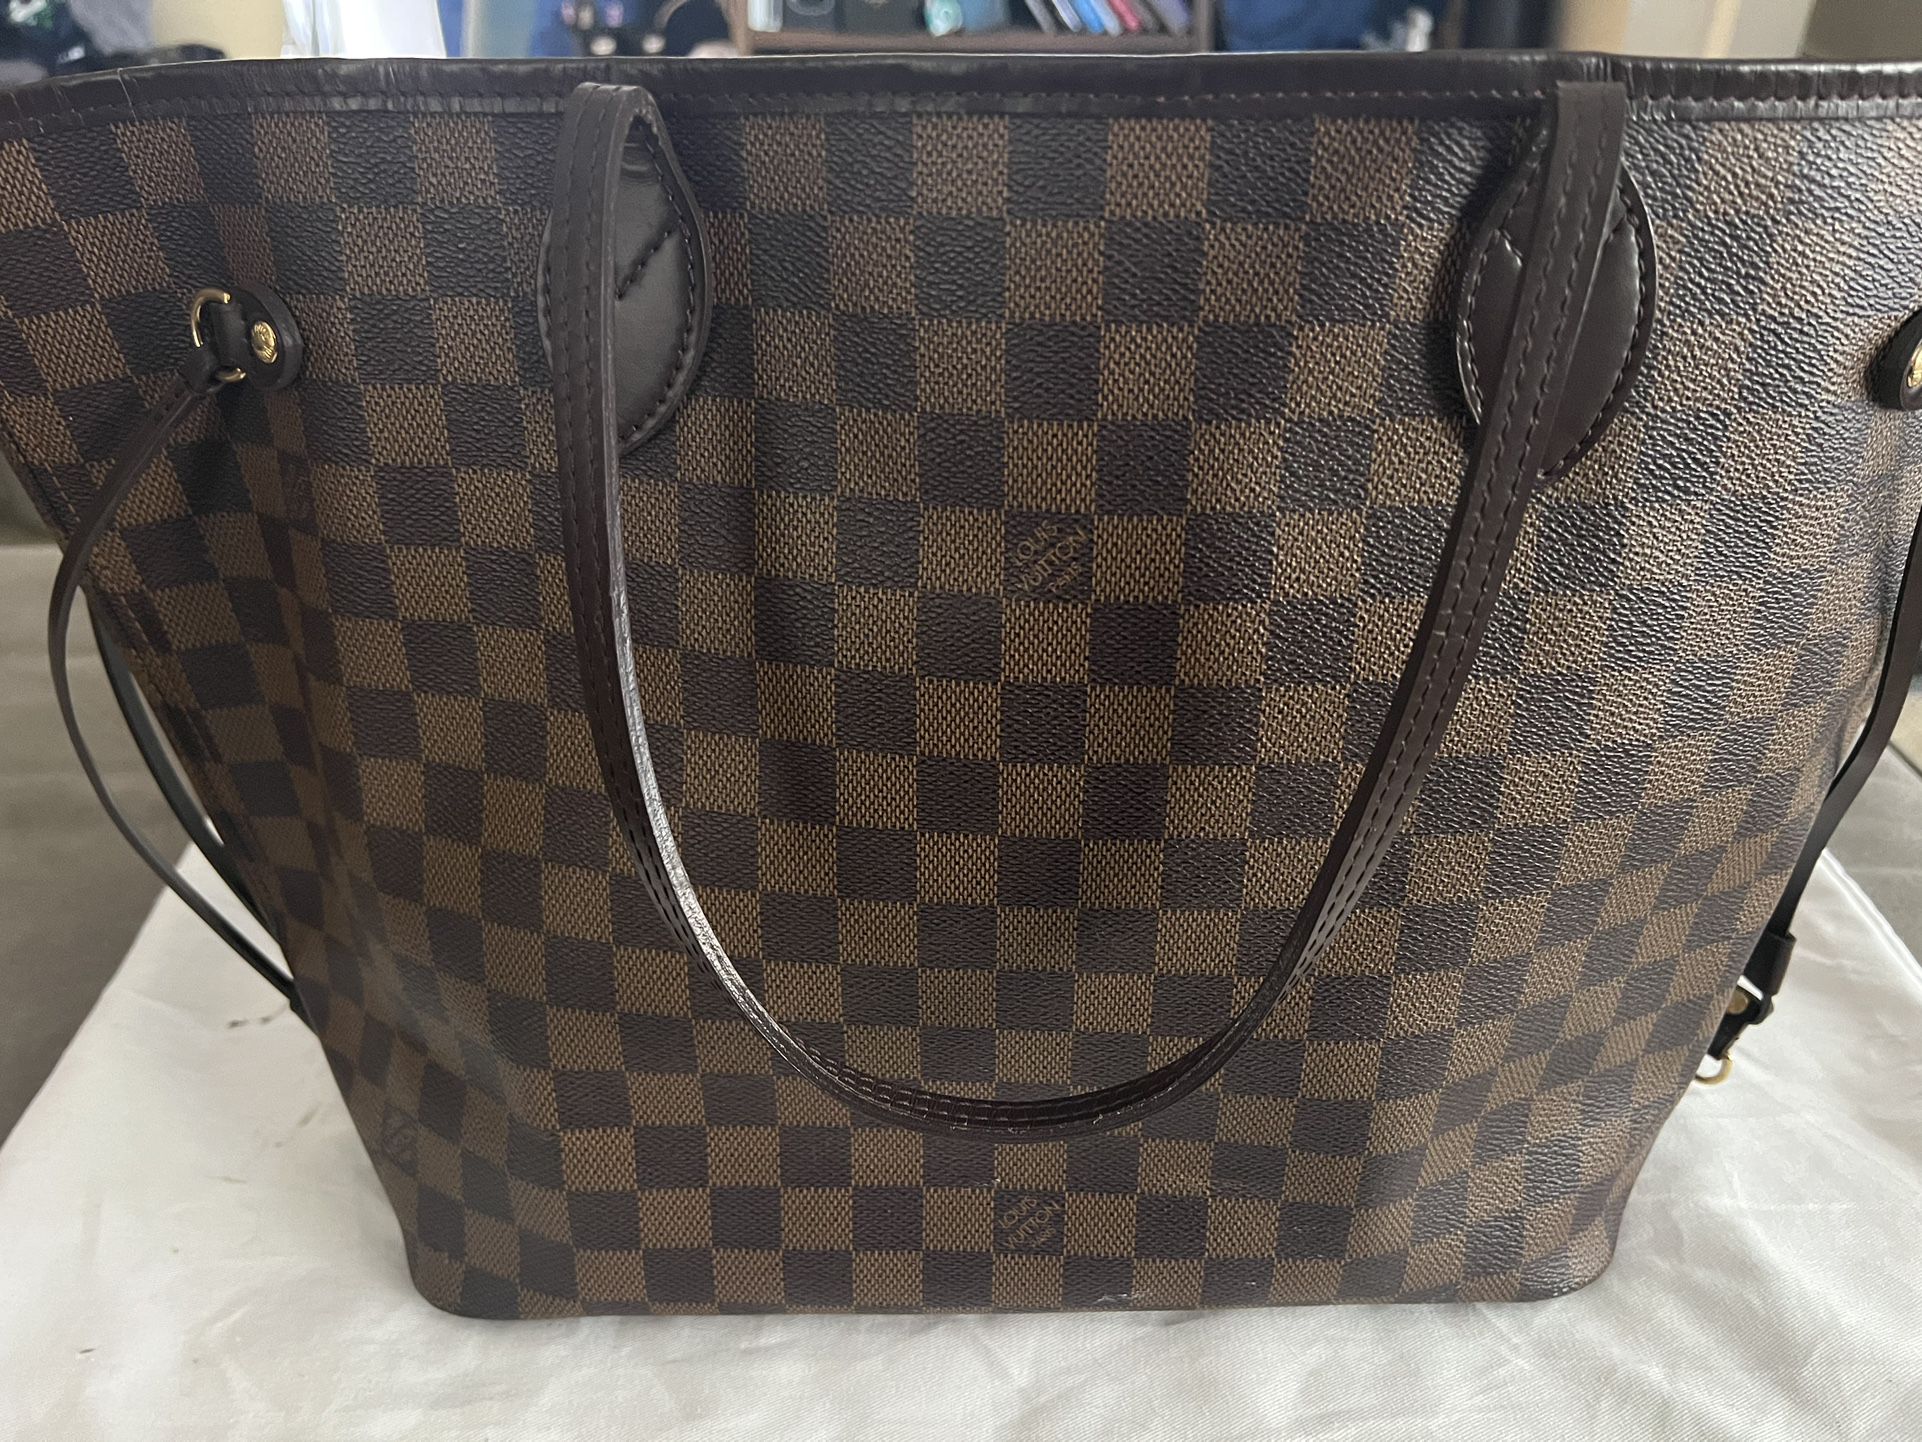 VINTAGE LV PURSE for Sale in Tacoma, WA - OfferUp